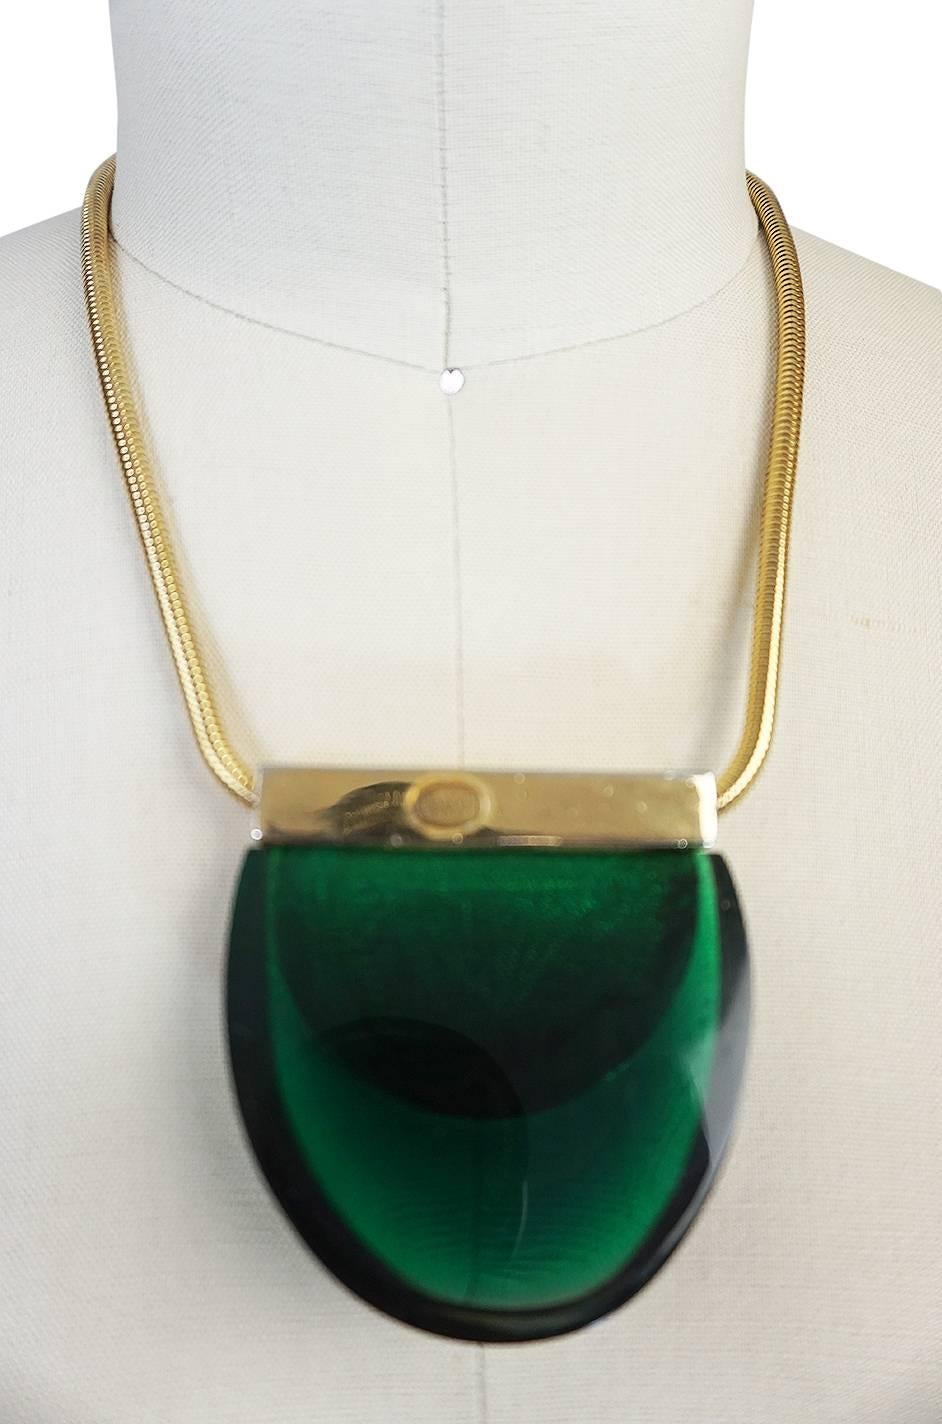 Women's 1970s Graduated Green Lanvin Resin and Gold Necklace